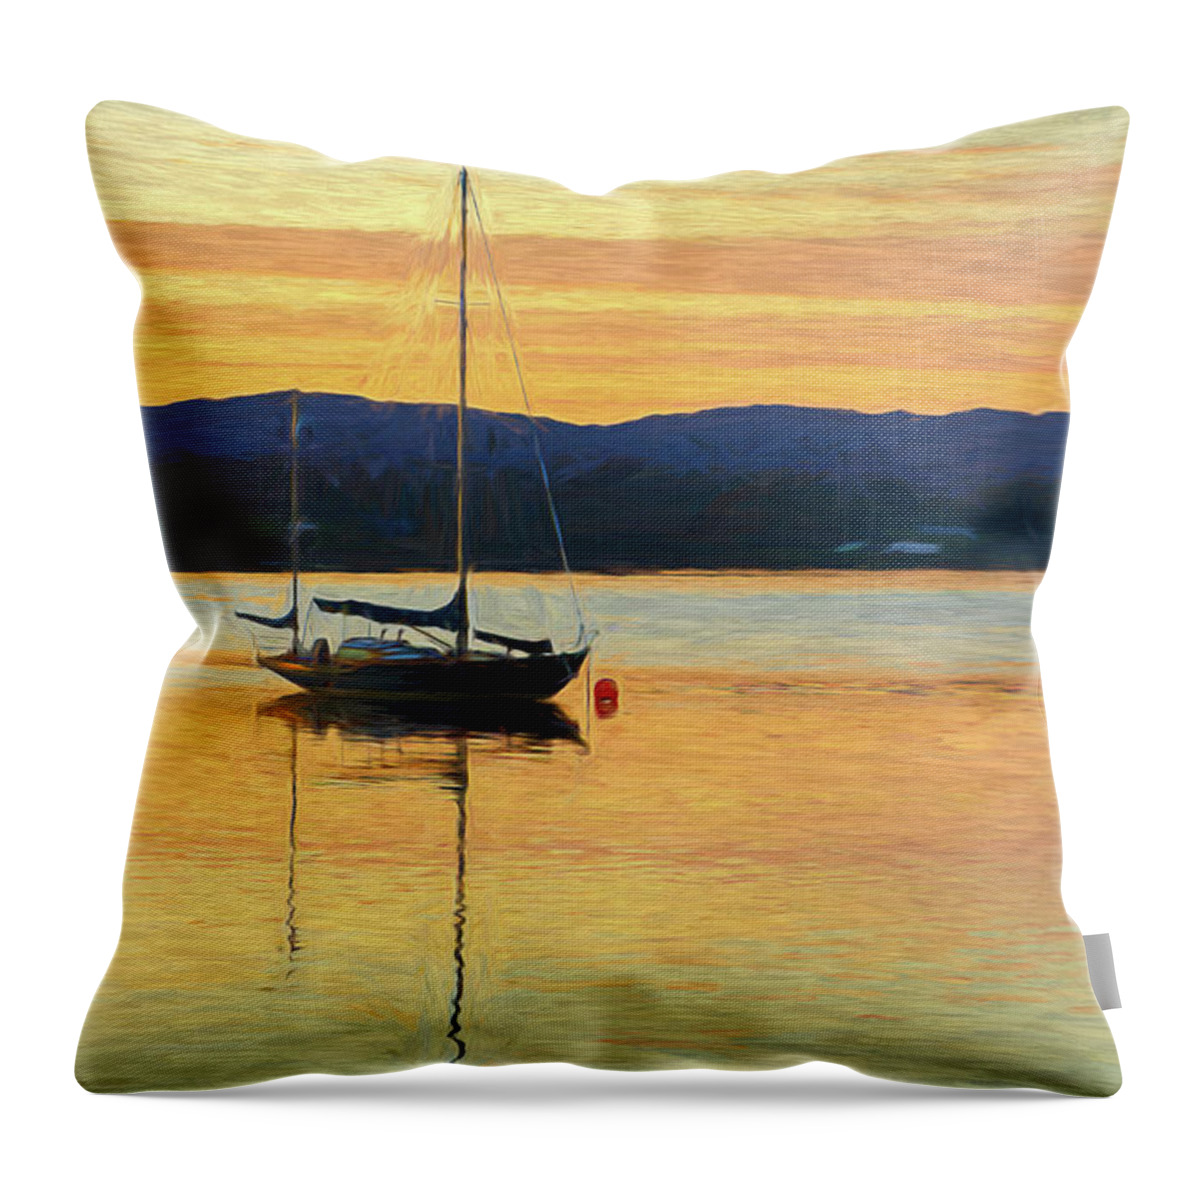 Beautiful Throw Pillow featuring the digital art Boat On A Lake at Sunset by Rick Deacon